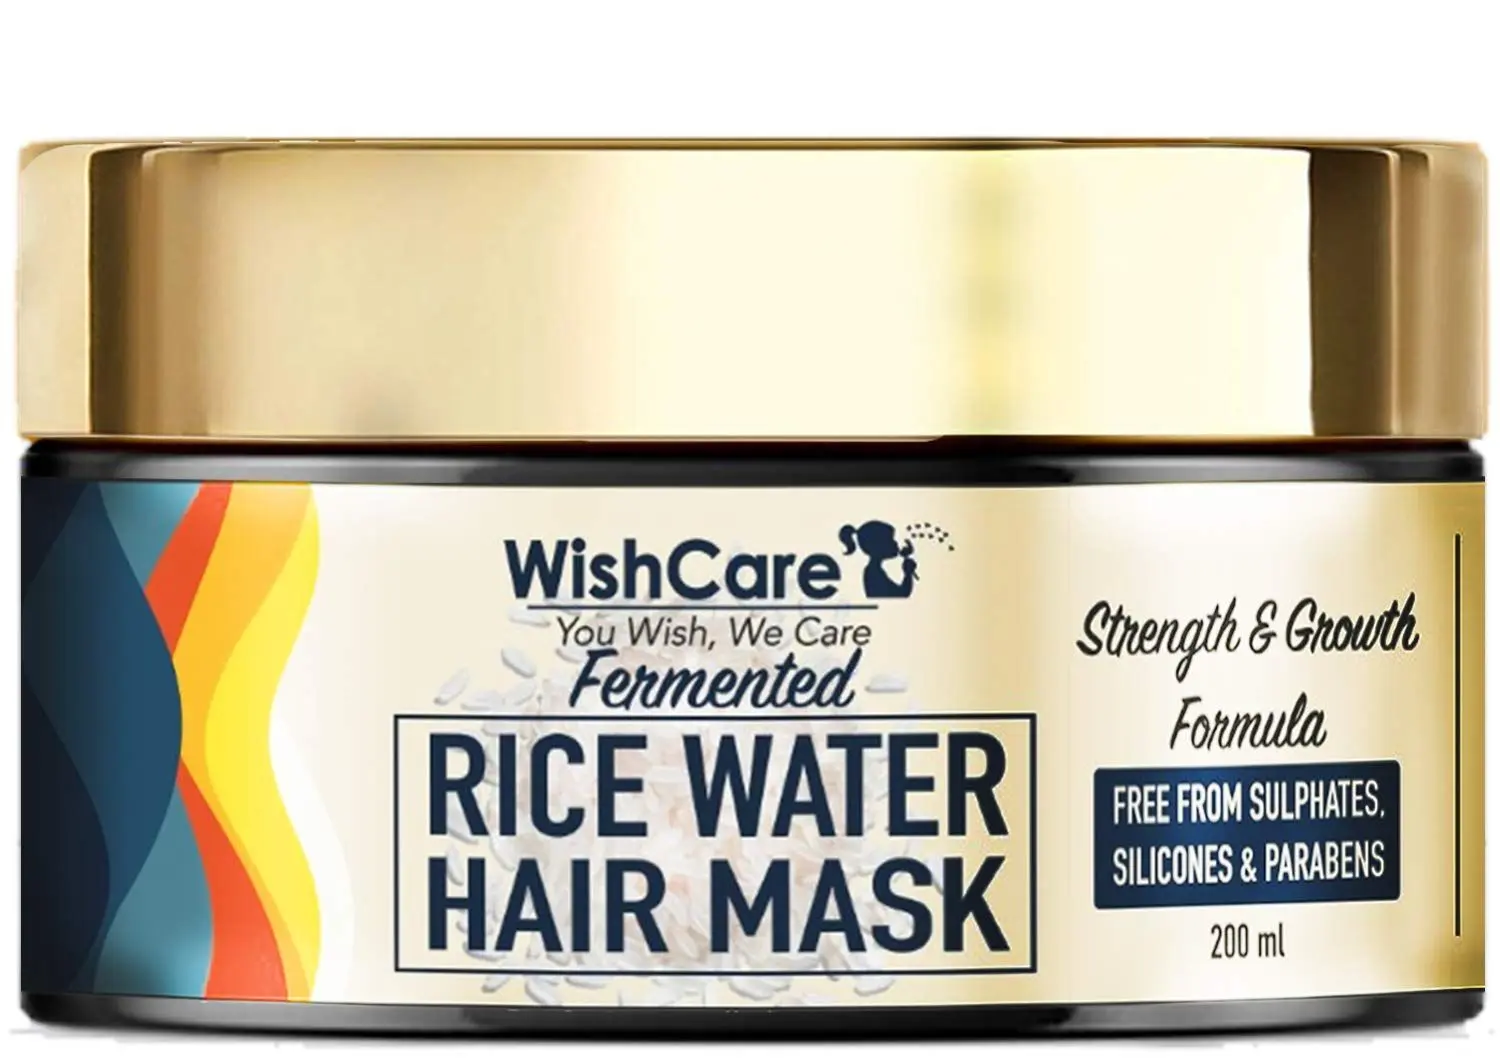 WishCare Fermented Rice Water Hair Mask- Strength & Growth Formula - Free from Sulphates, Silicones & Paraben - For All Hair Types (200 ml)